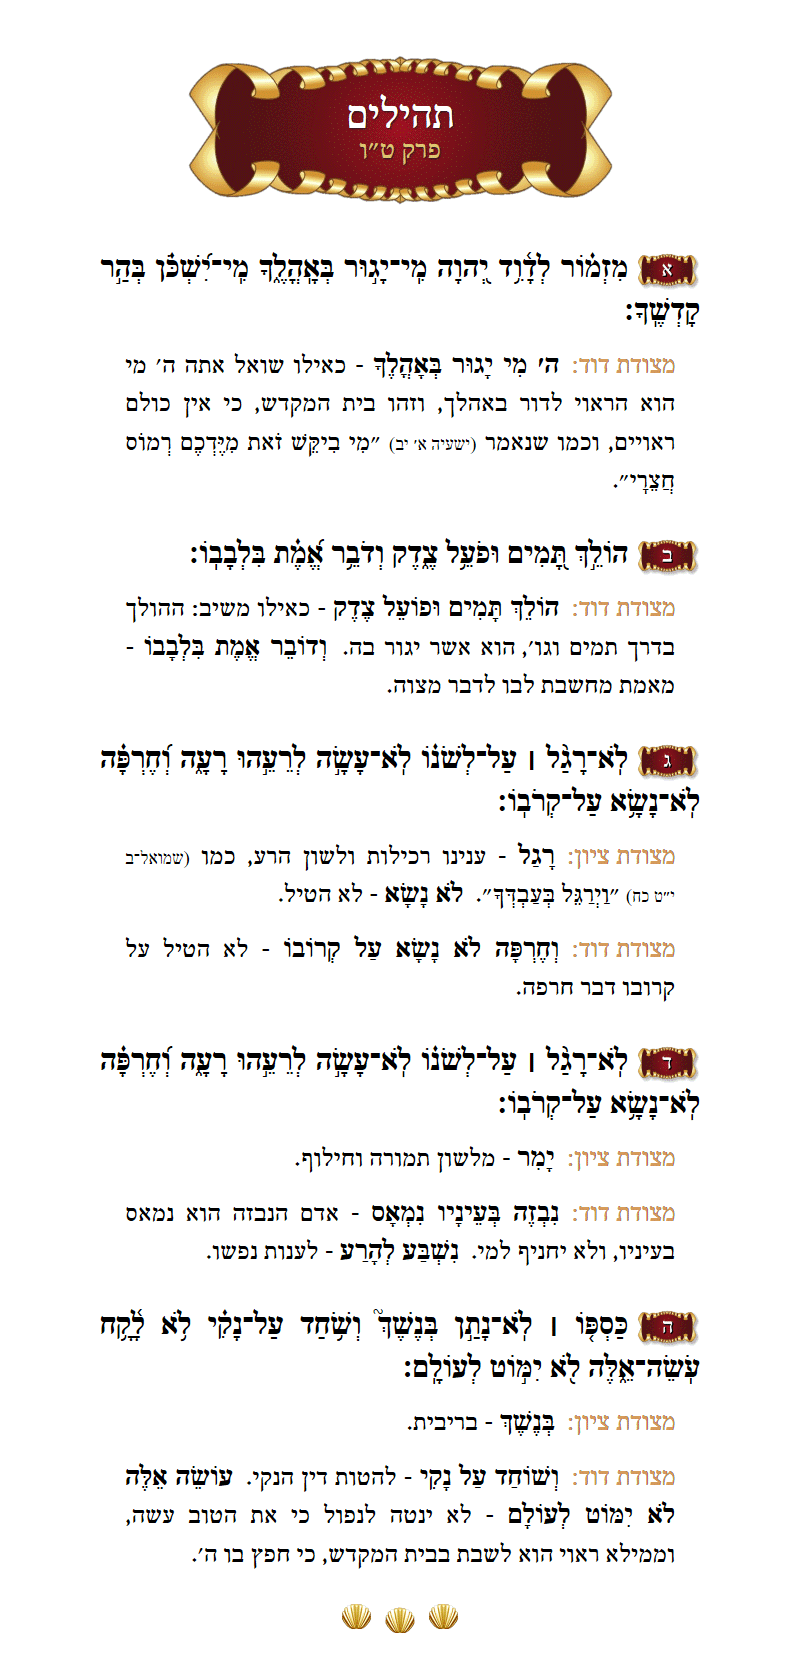 Sefer Tehillim Chapter 15 with commentary